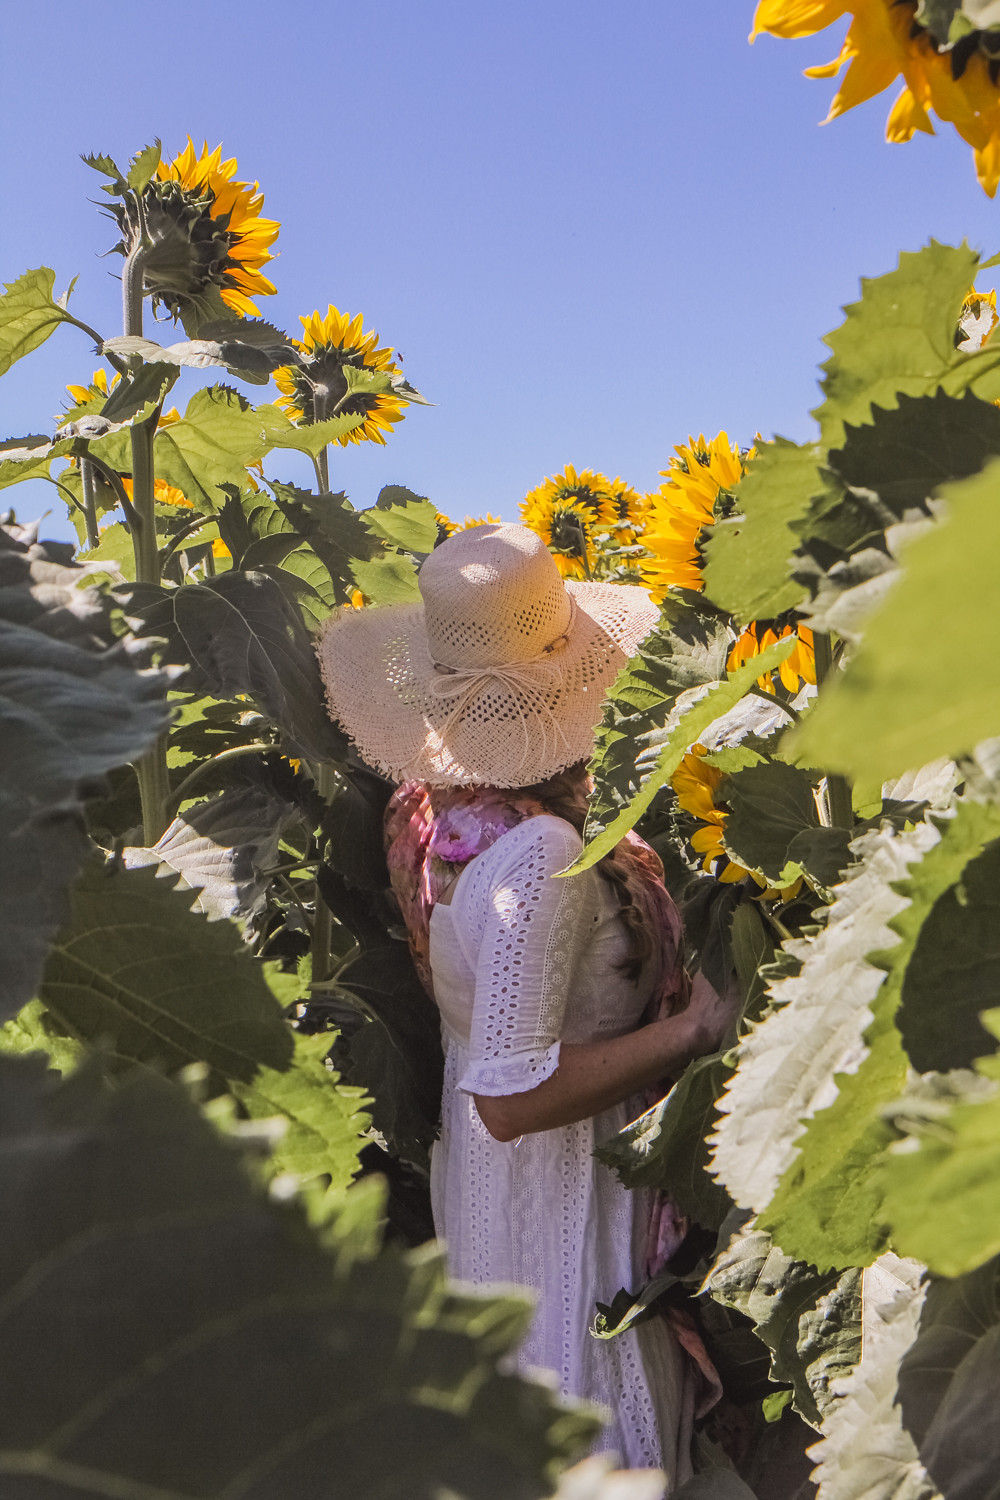 Goldfields Girl at sunflower farm in Ballarat in Victoria. Wearing white eyelet dress, straw hat and ping ring sling baby carrier.